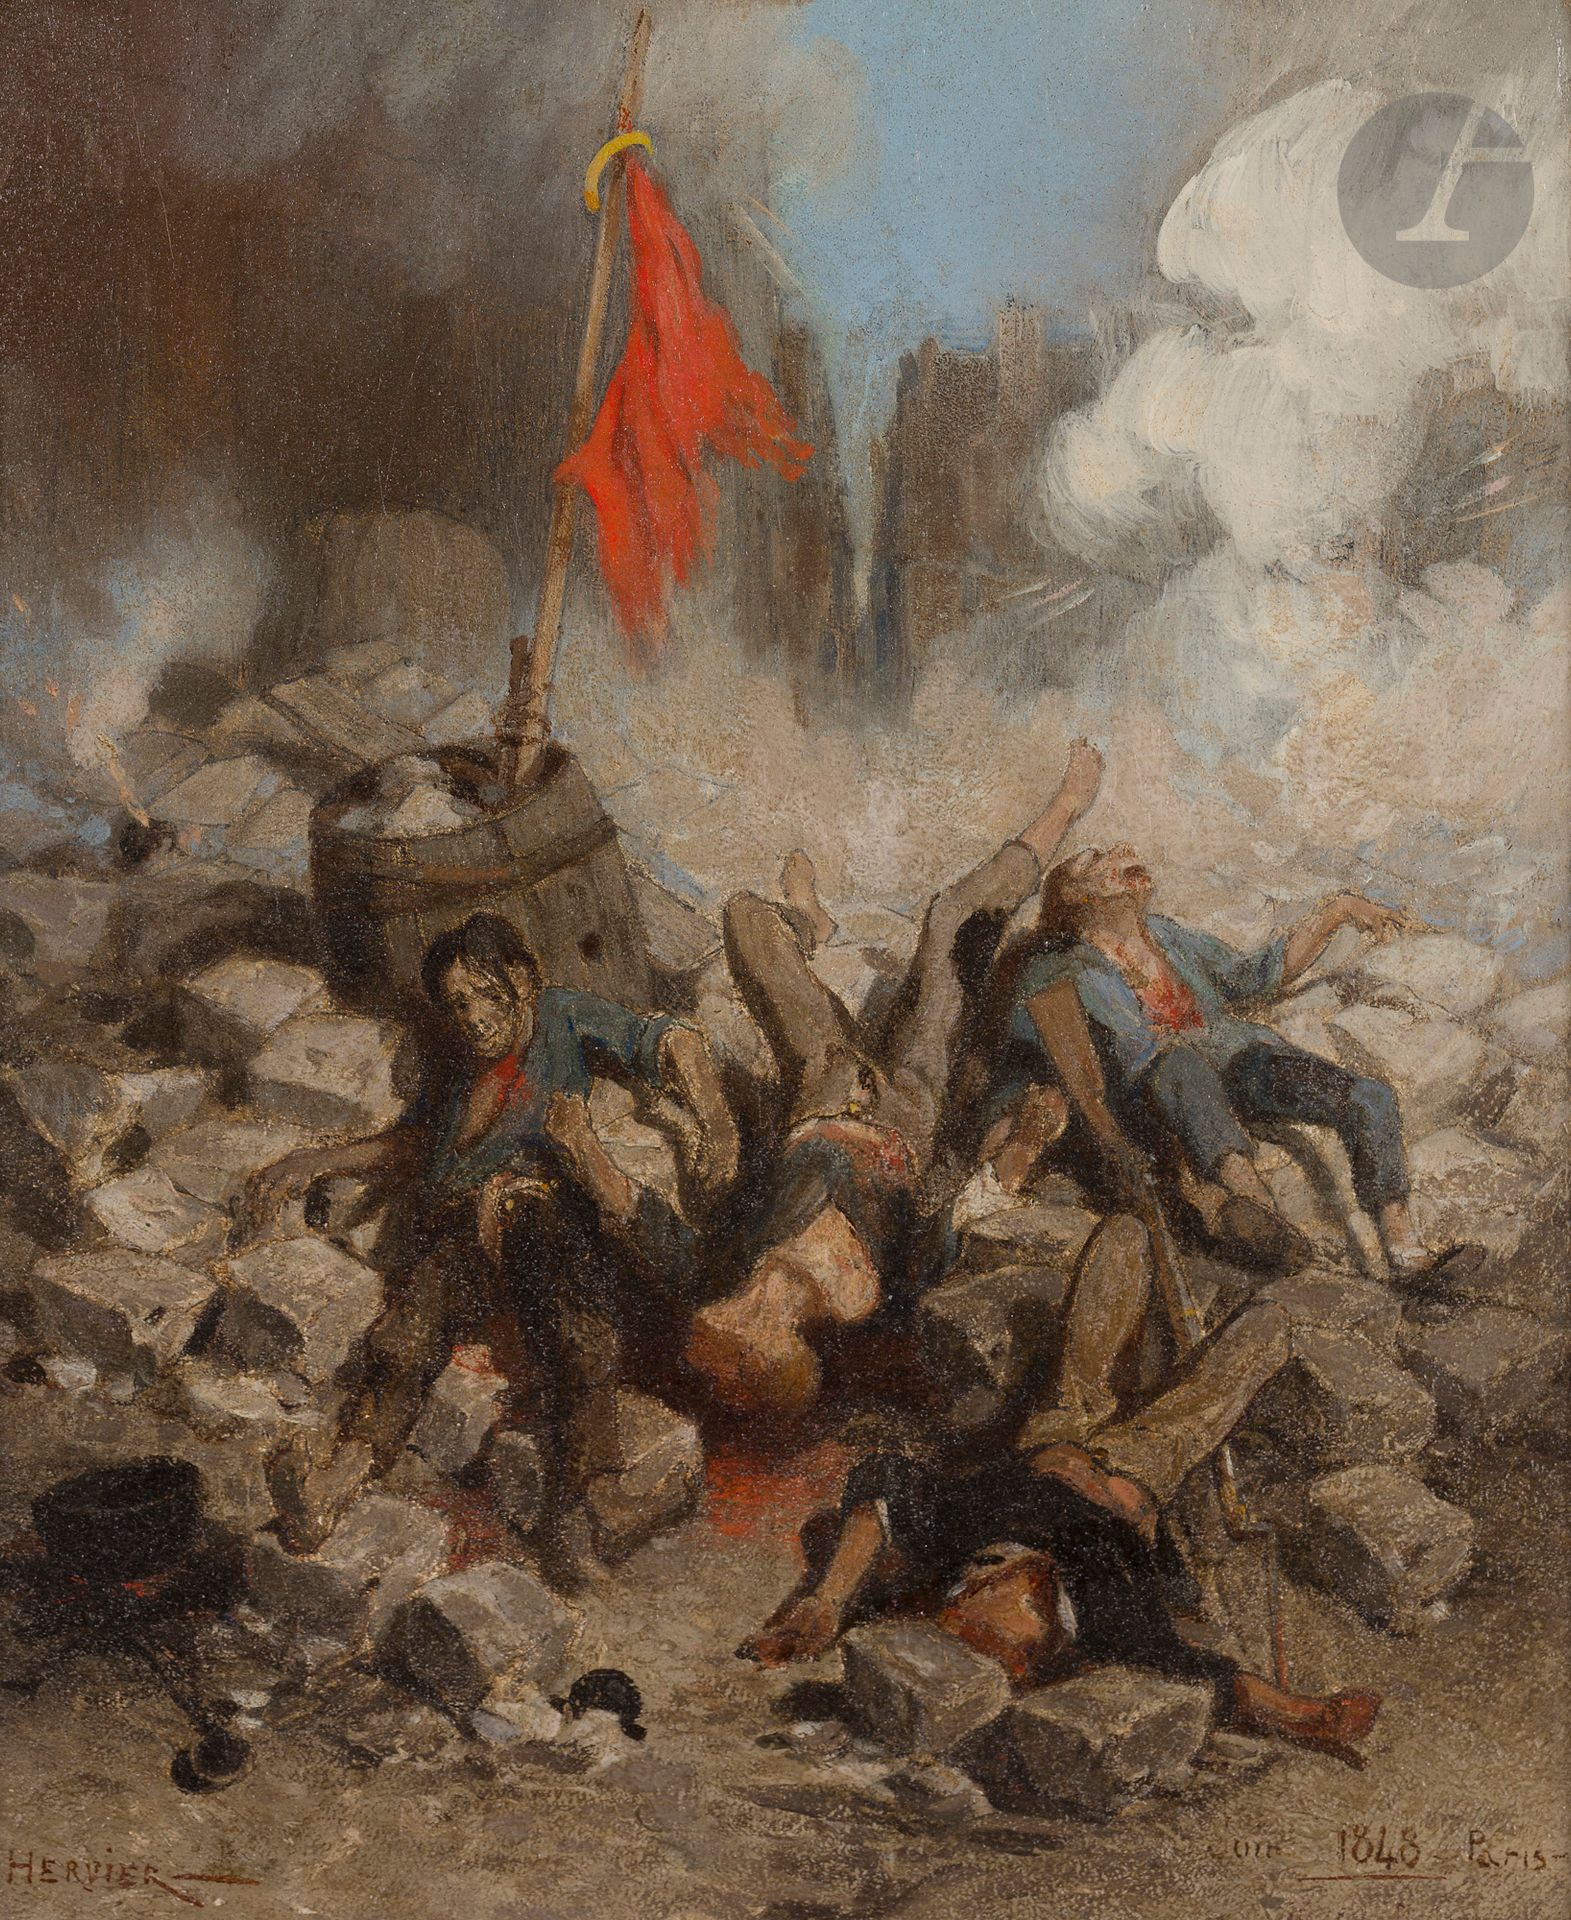 Null Louis-Adolphe HERVIER (Paris, 1818 - 1879)
The Barricade, 1848
Oil on panel&hellip;